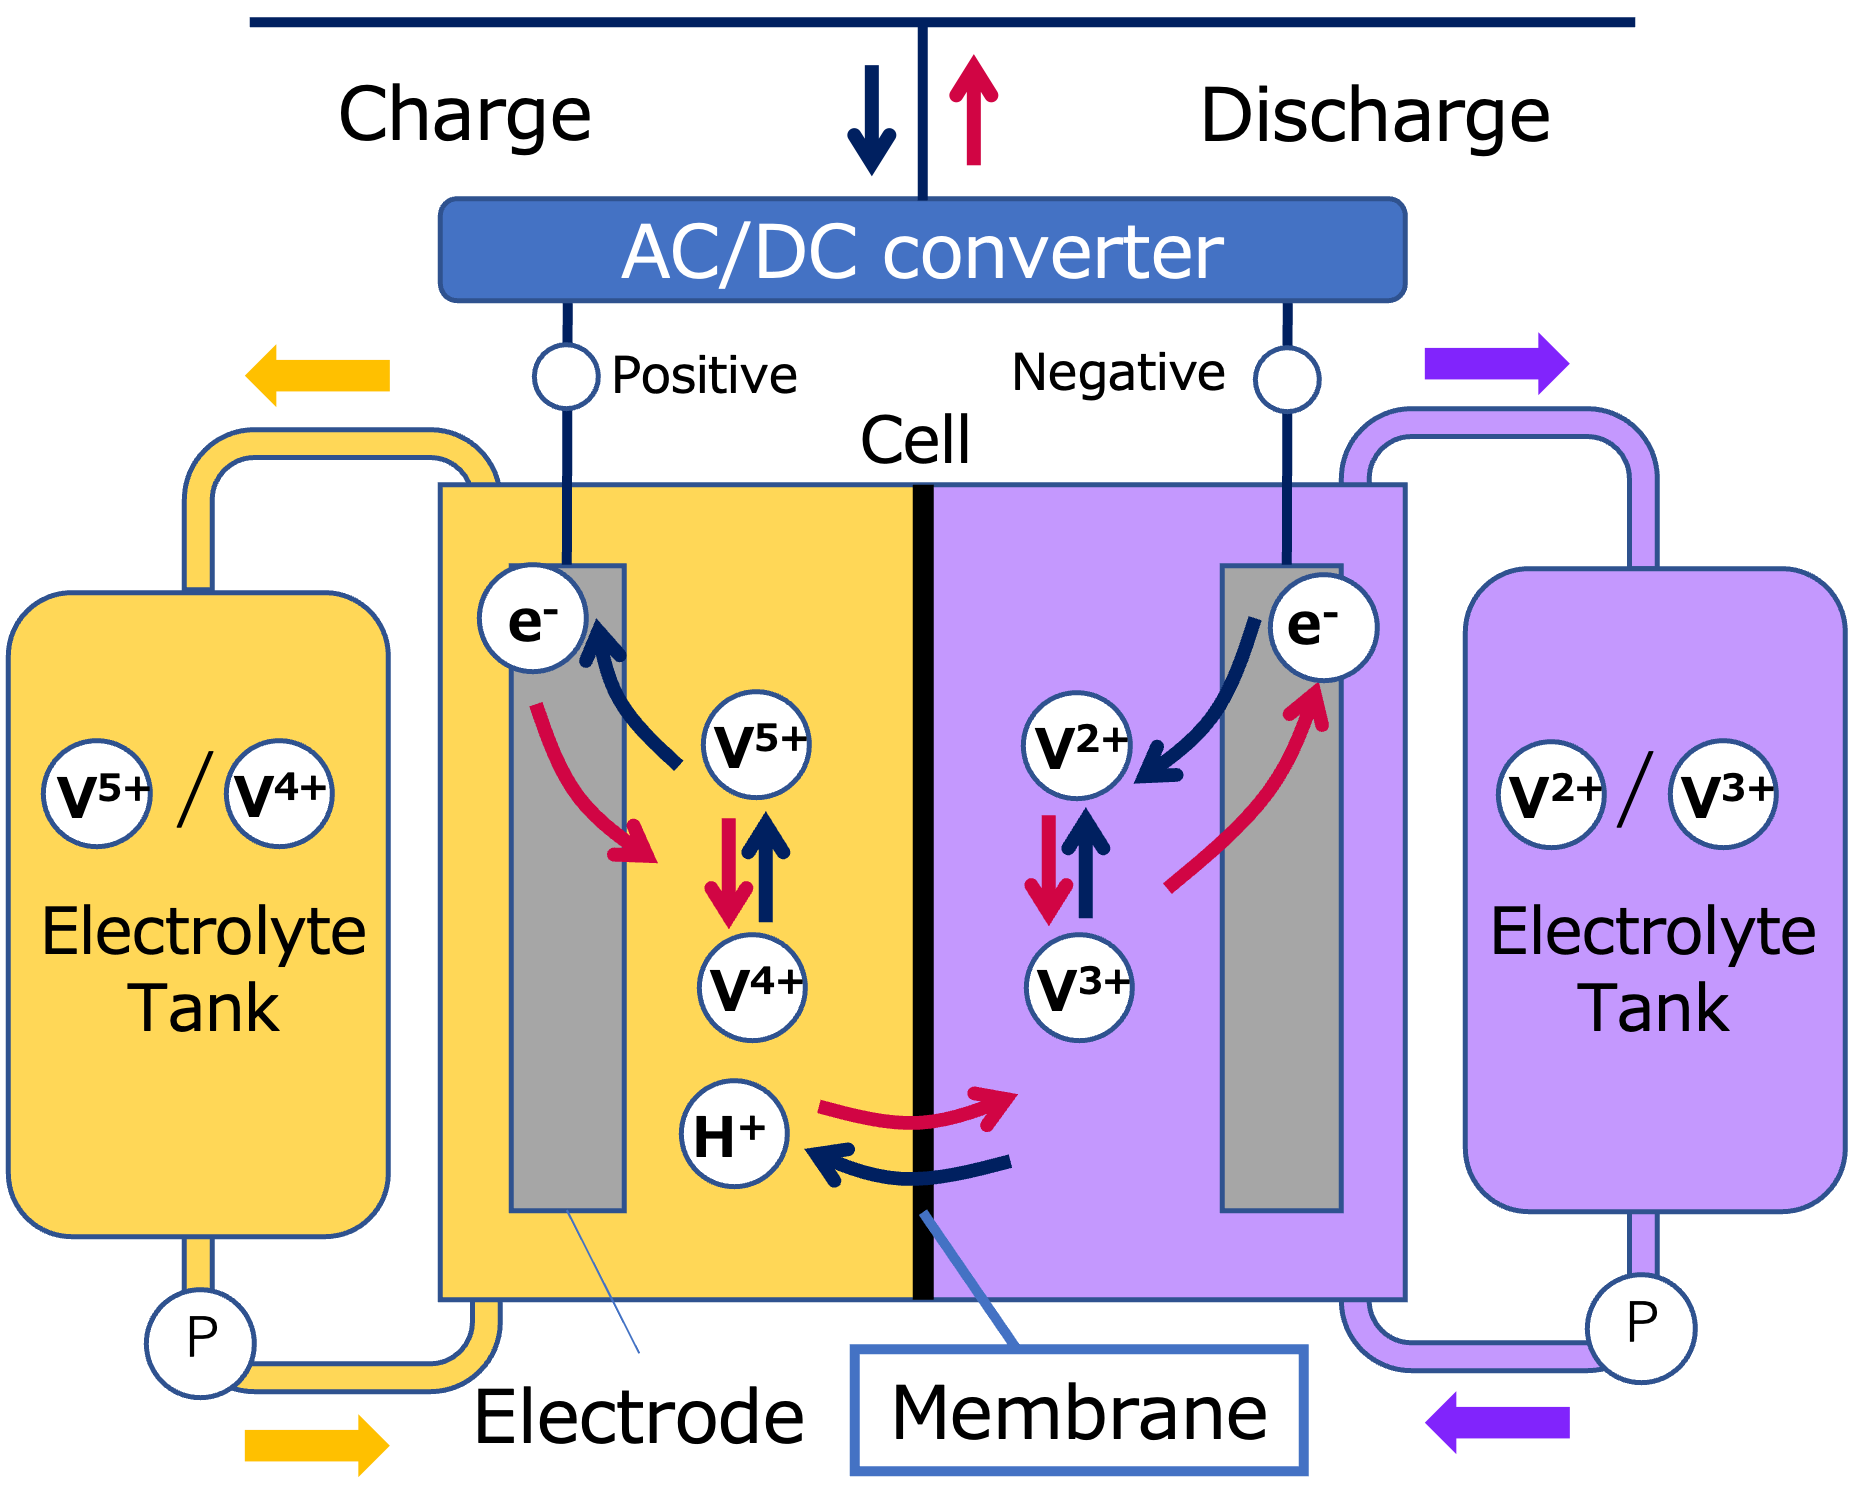 Application to ion exchange membrane for redox flow battery